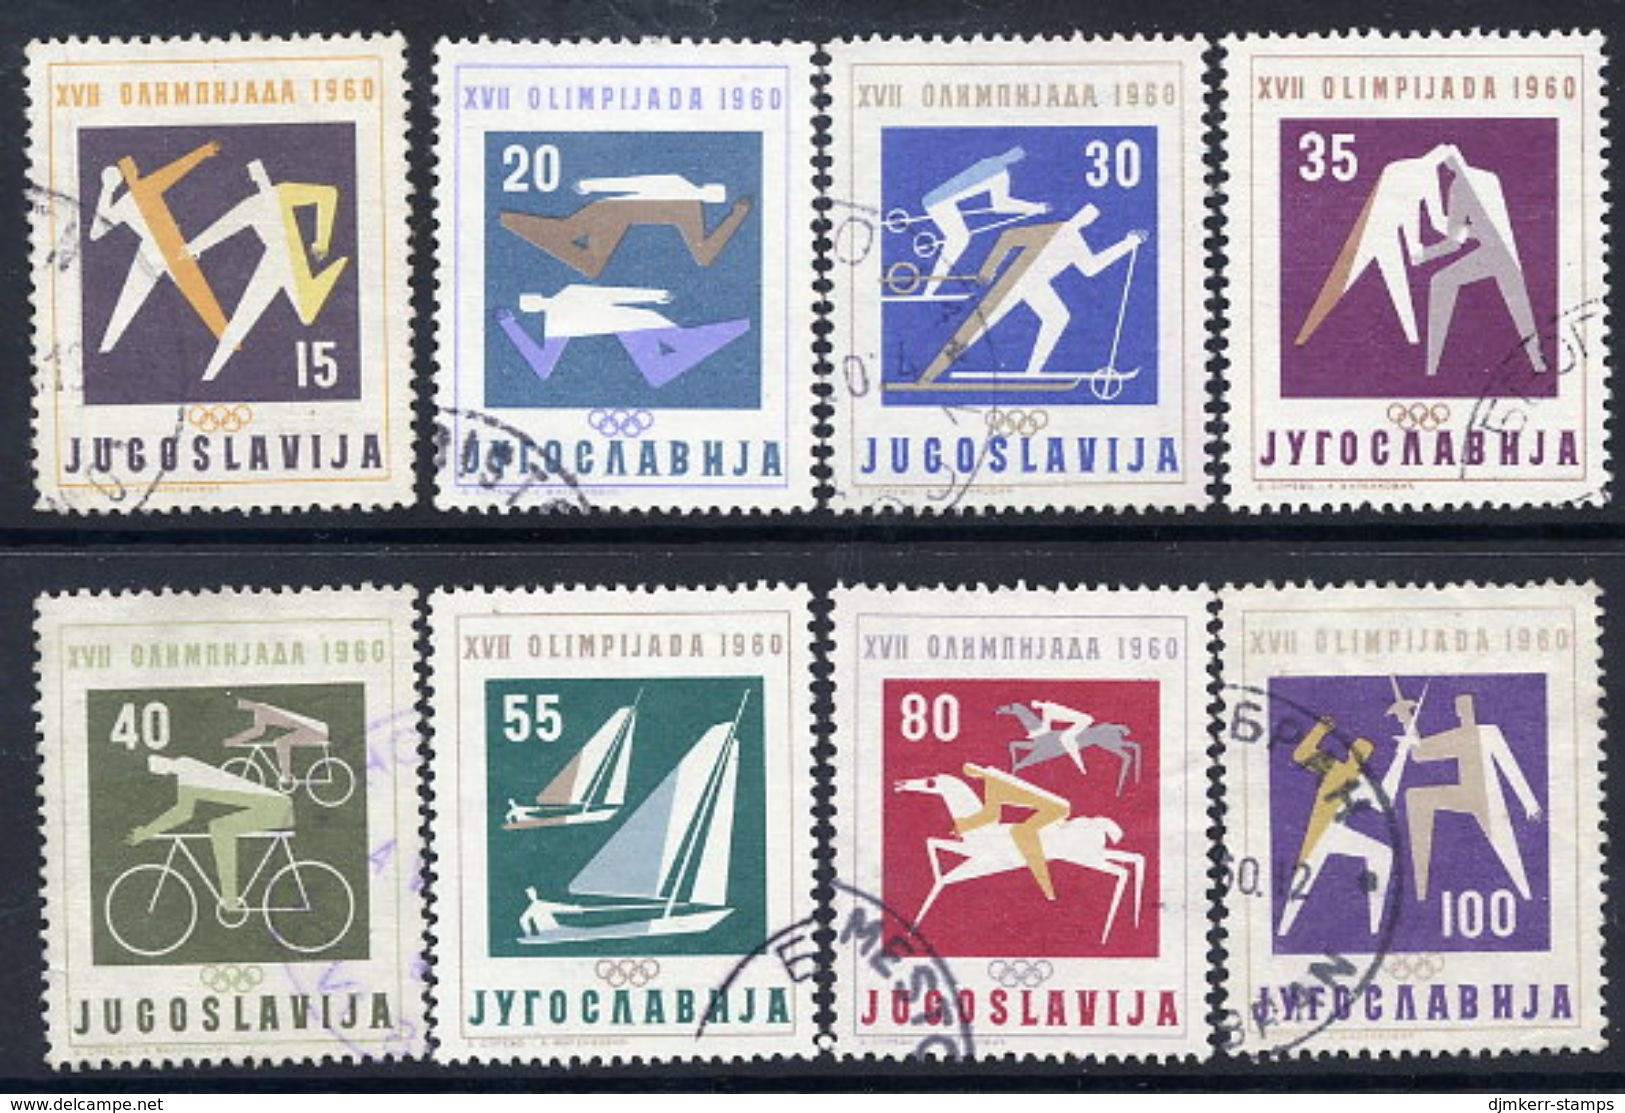 YUGOSLAVIA 1960 Olympic Games, Used.  Michel 909-16 - Used Stamps